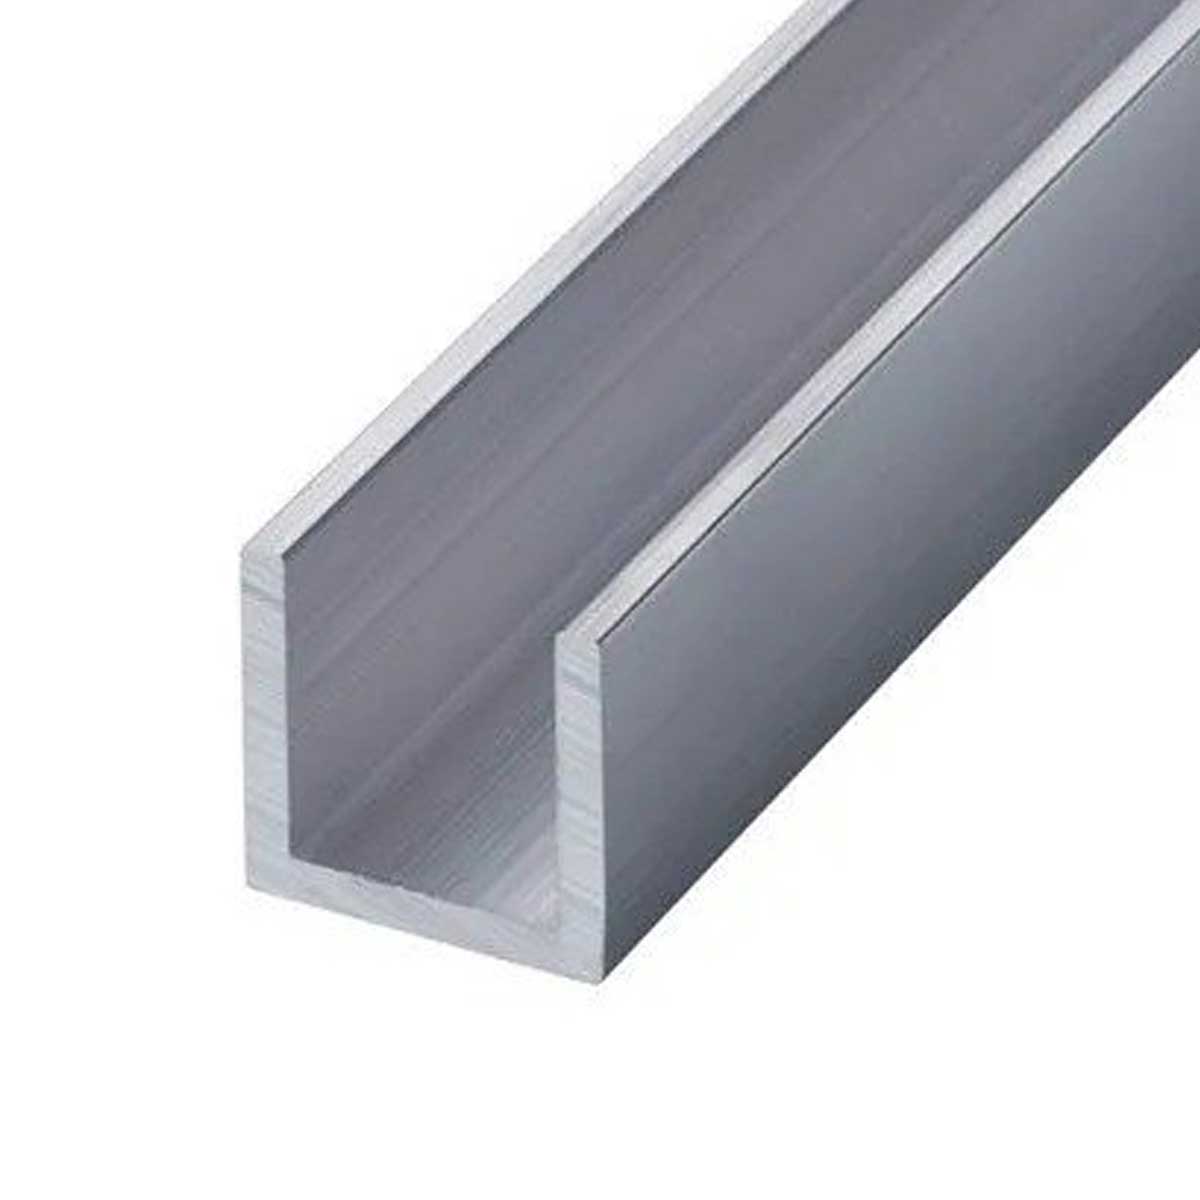 Aluminium C Channel For Construction Manufacturers, Suppliers in Jhunjhunu